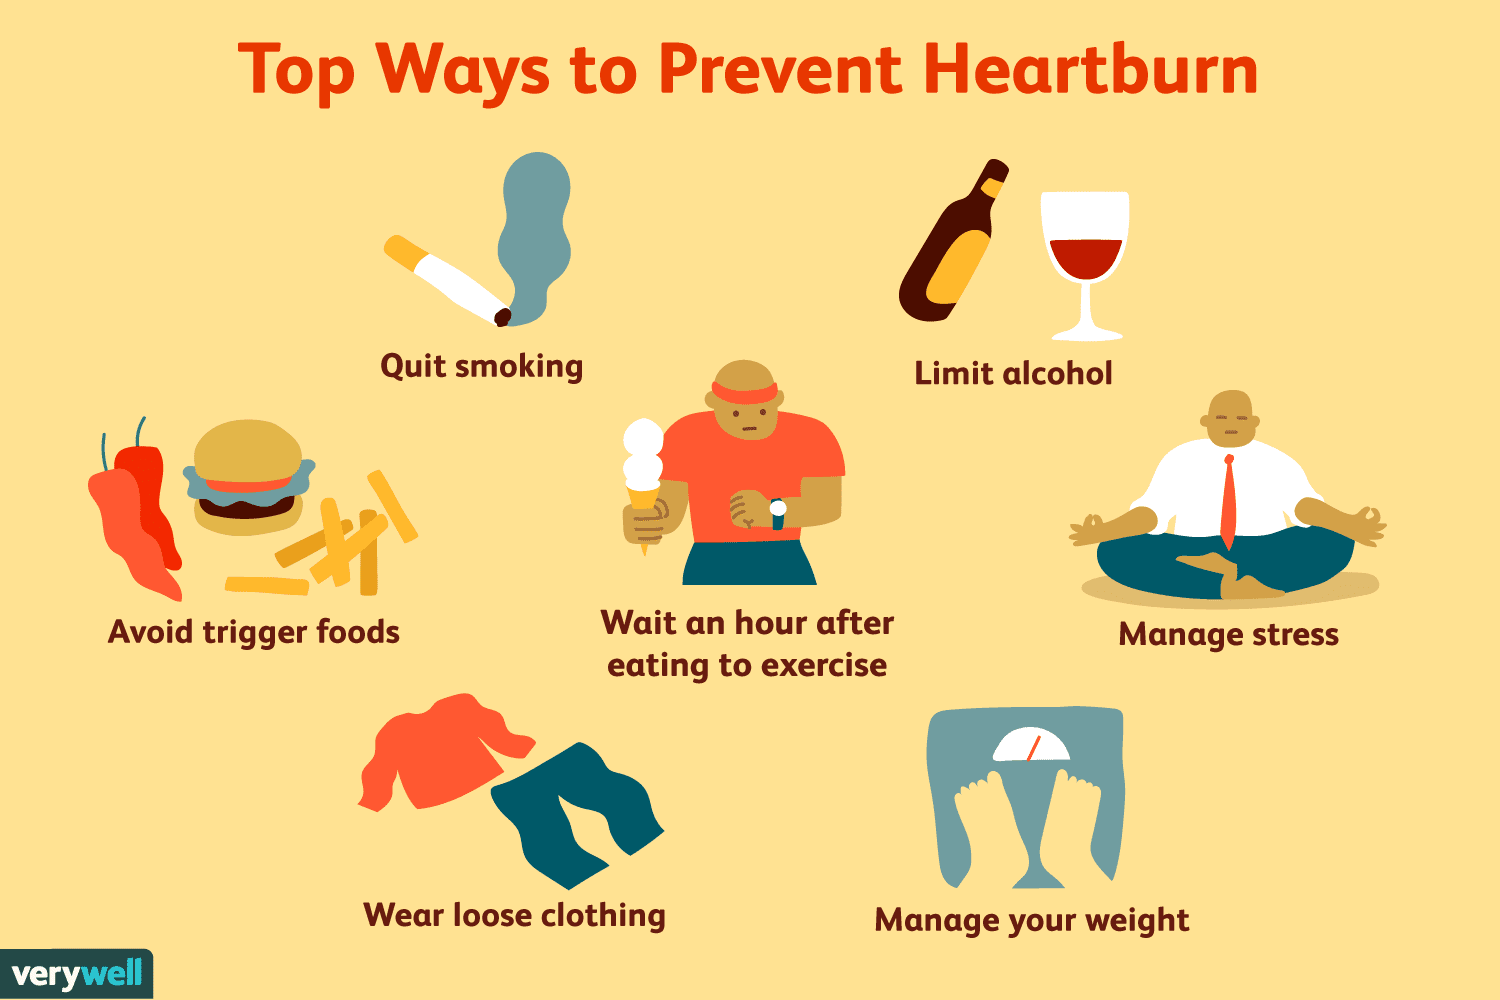 How to Improves the Heartburn and Reflux